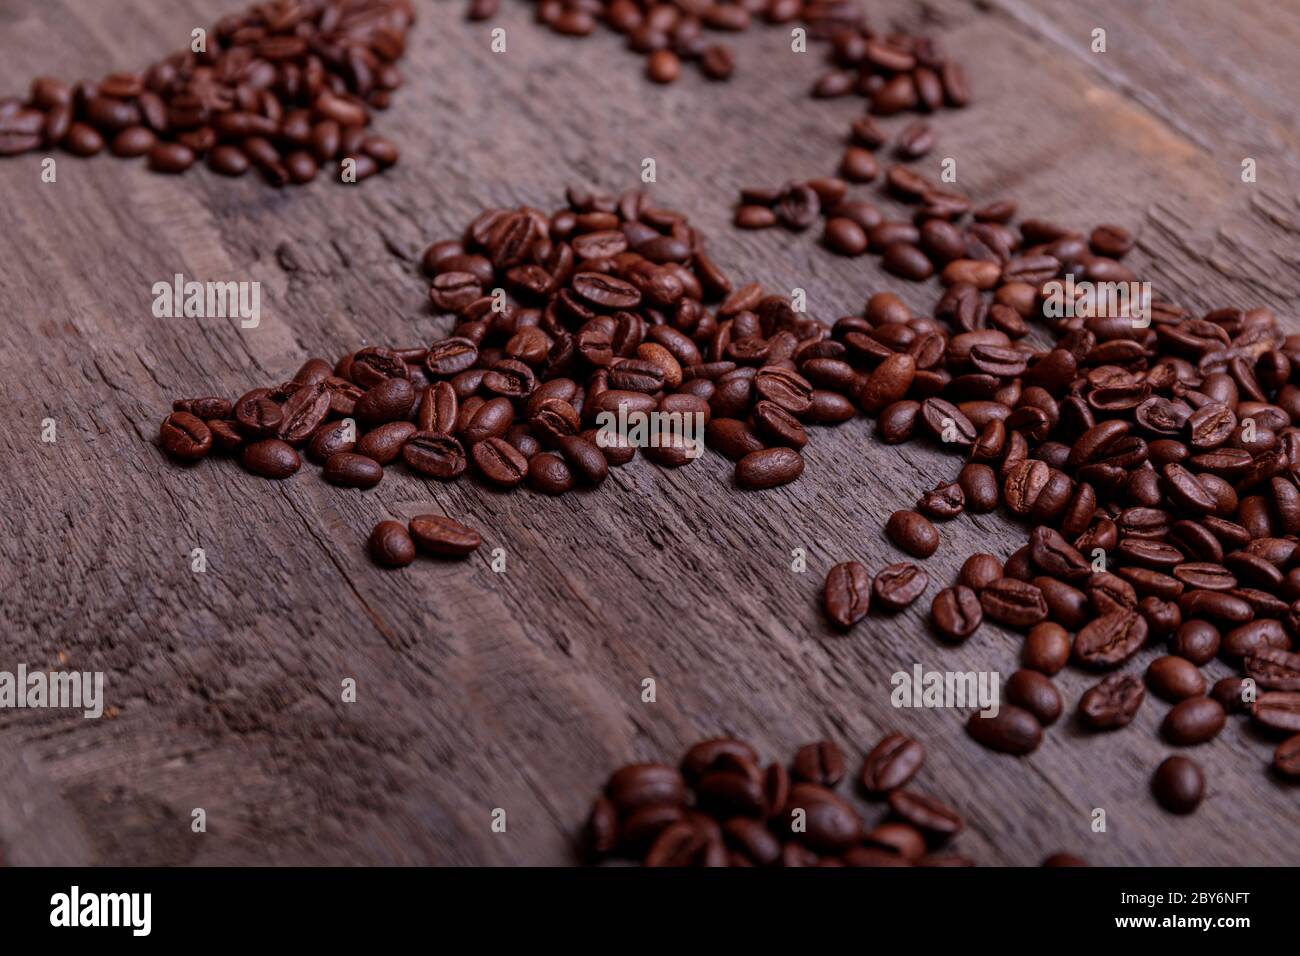 Dramatic photo of world map made of arabic roasted coffee beans on old vintage wooden table. Stock Photo